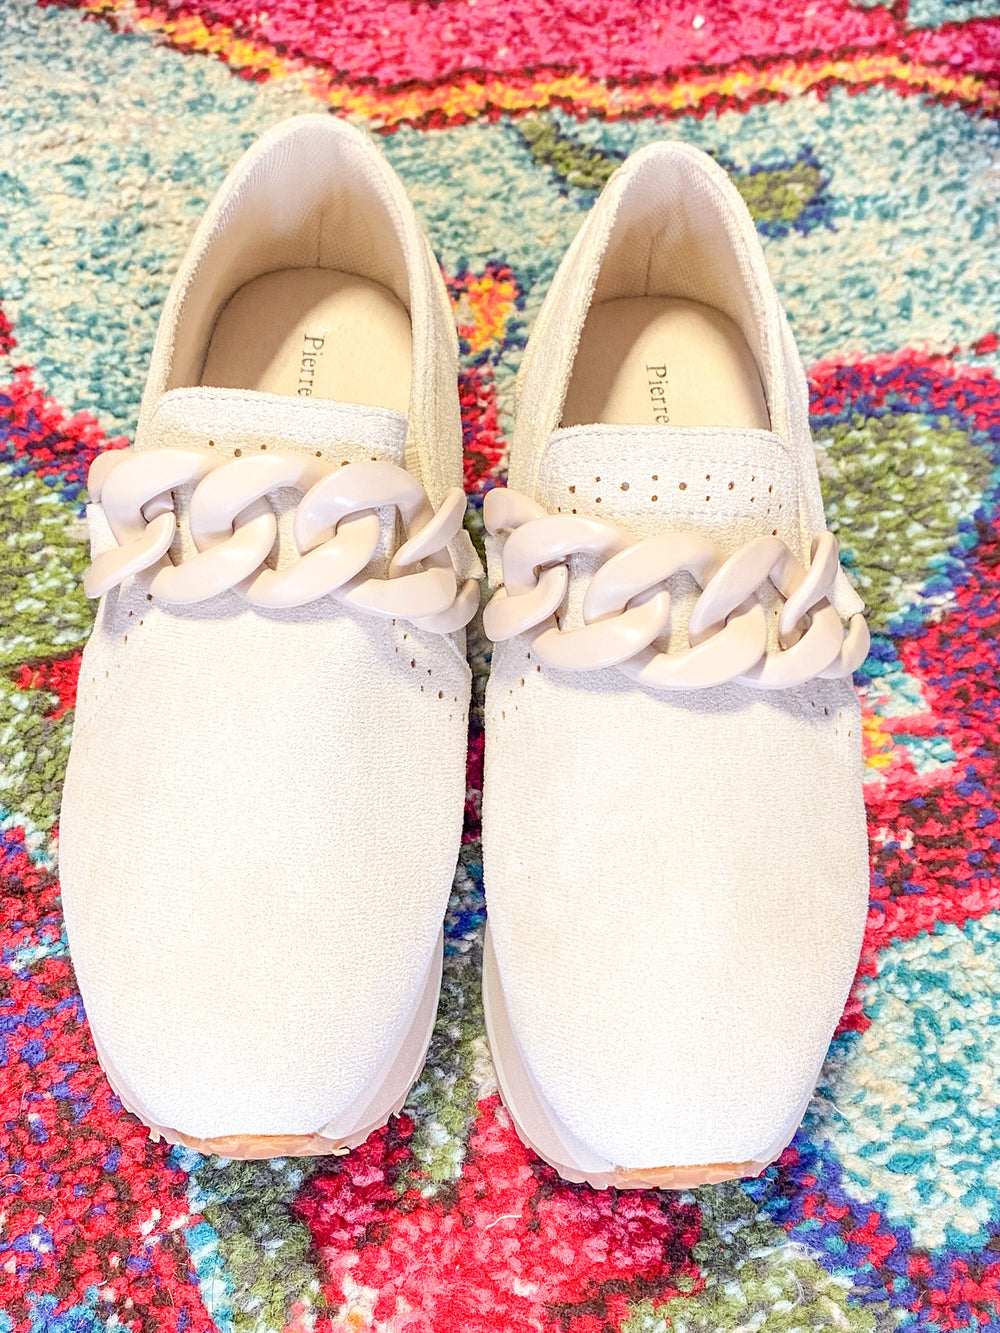 Making Rounds Loafers - Ivory Suede